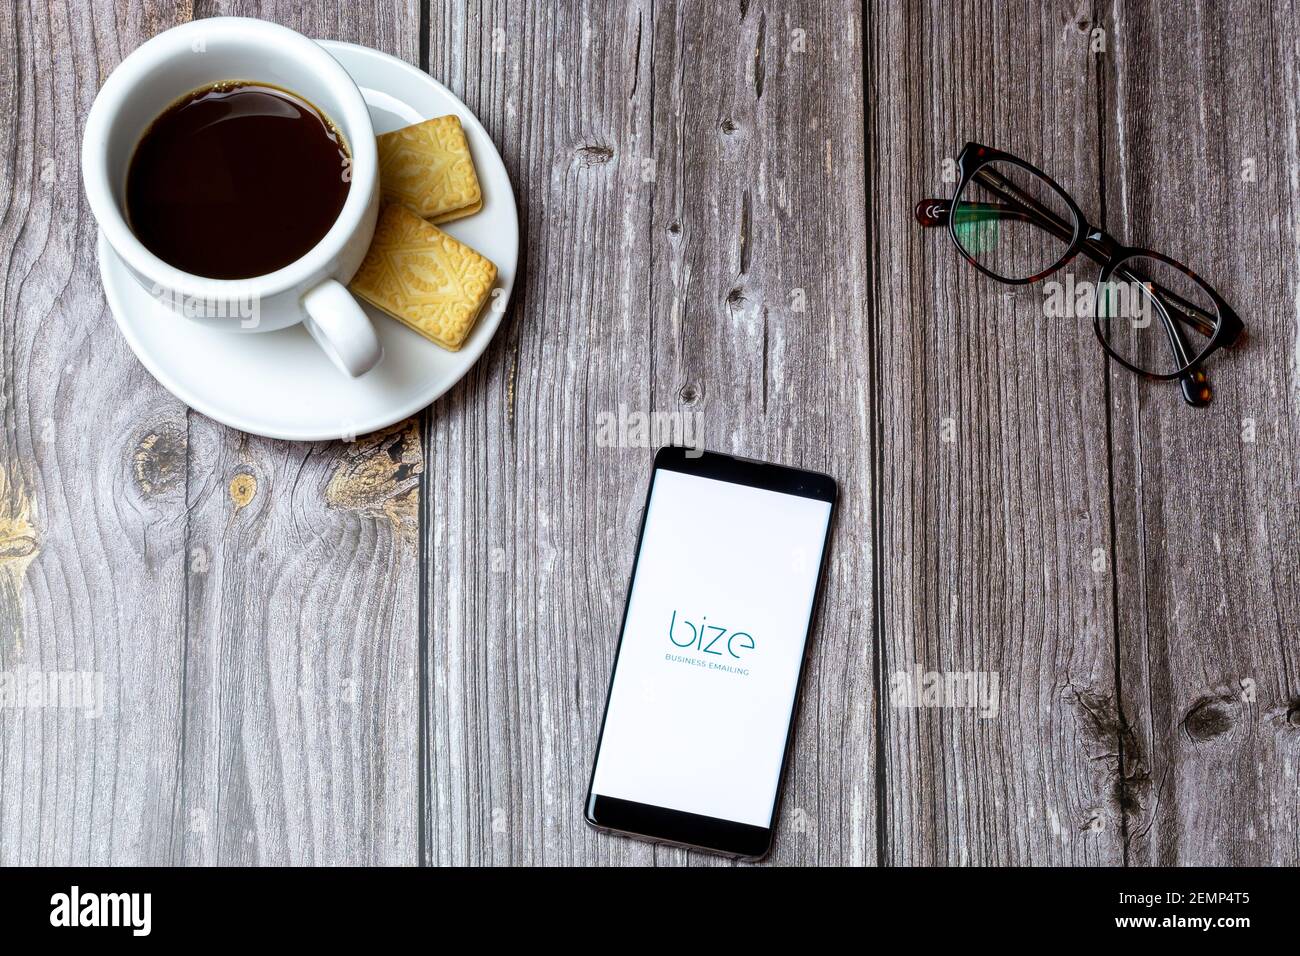 A mobile phone or cell phone on a wooden table with the Bize Business Emailing app open next to a coffee Stock Photo